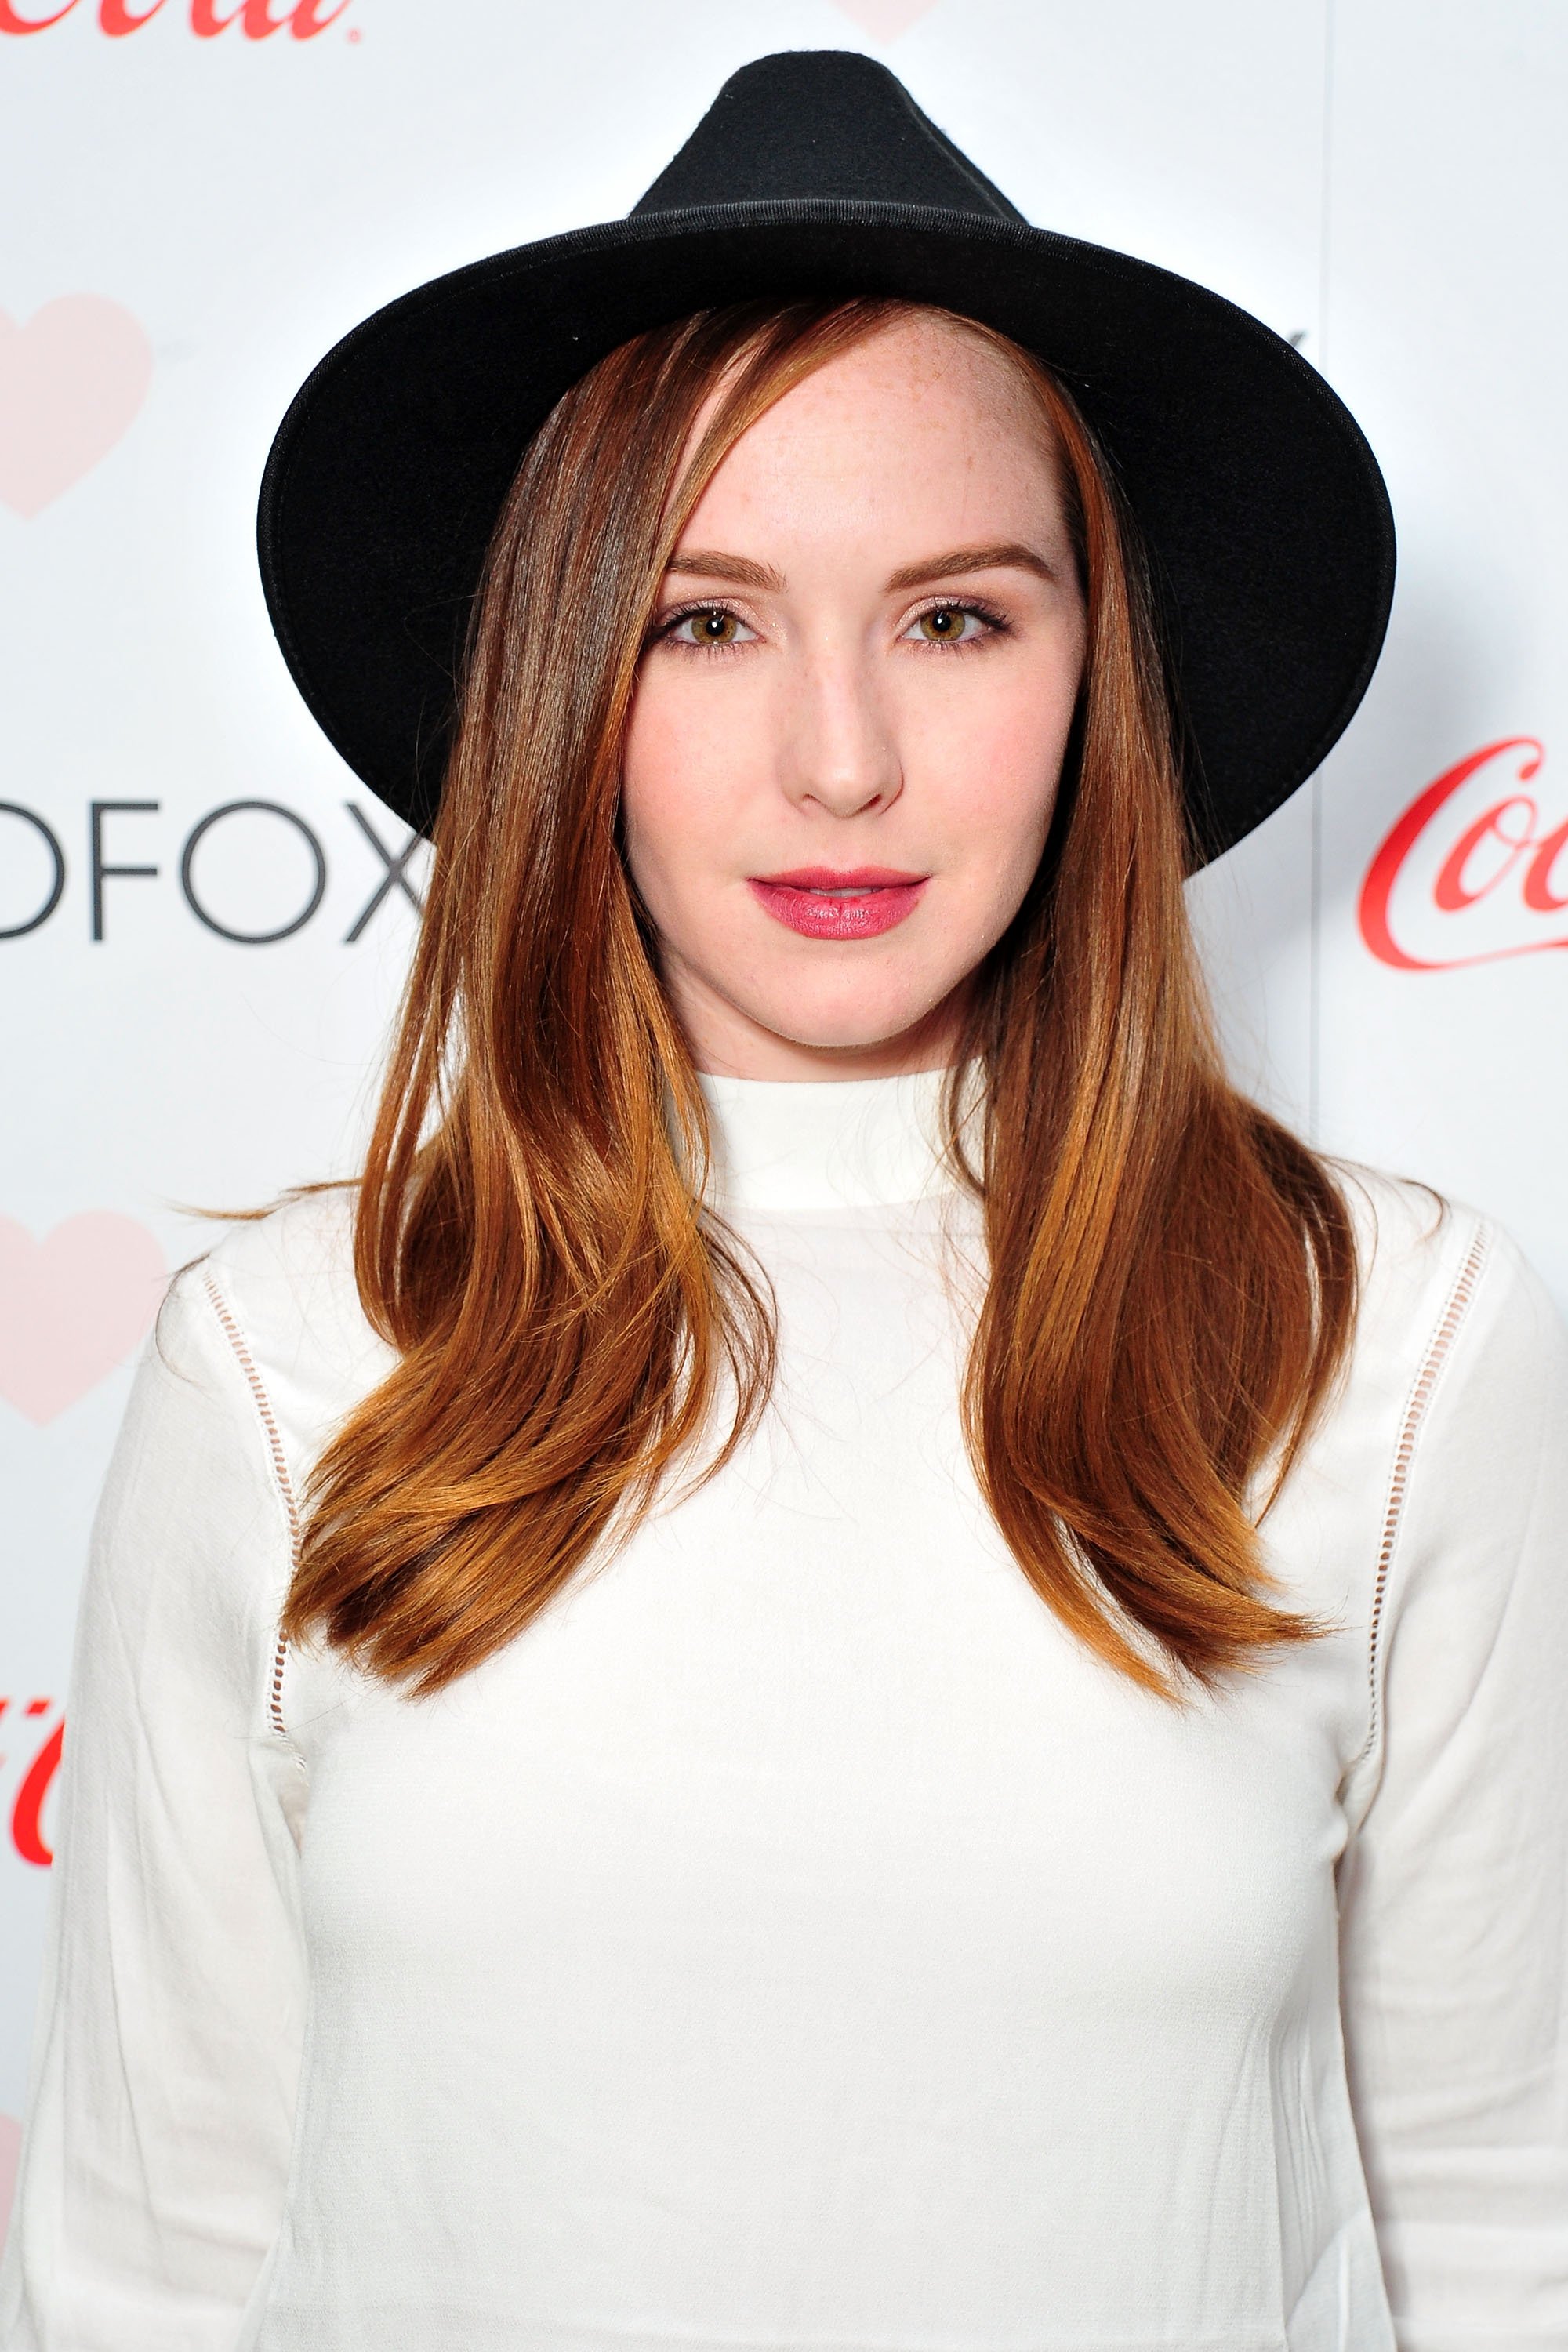 Camryn Grimes on the red carpet